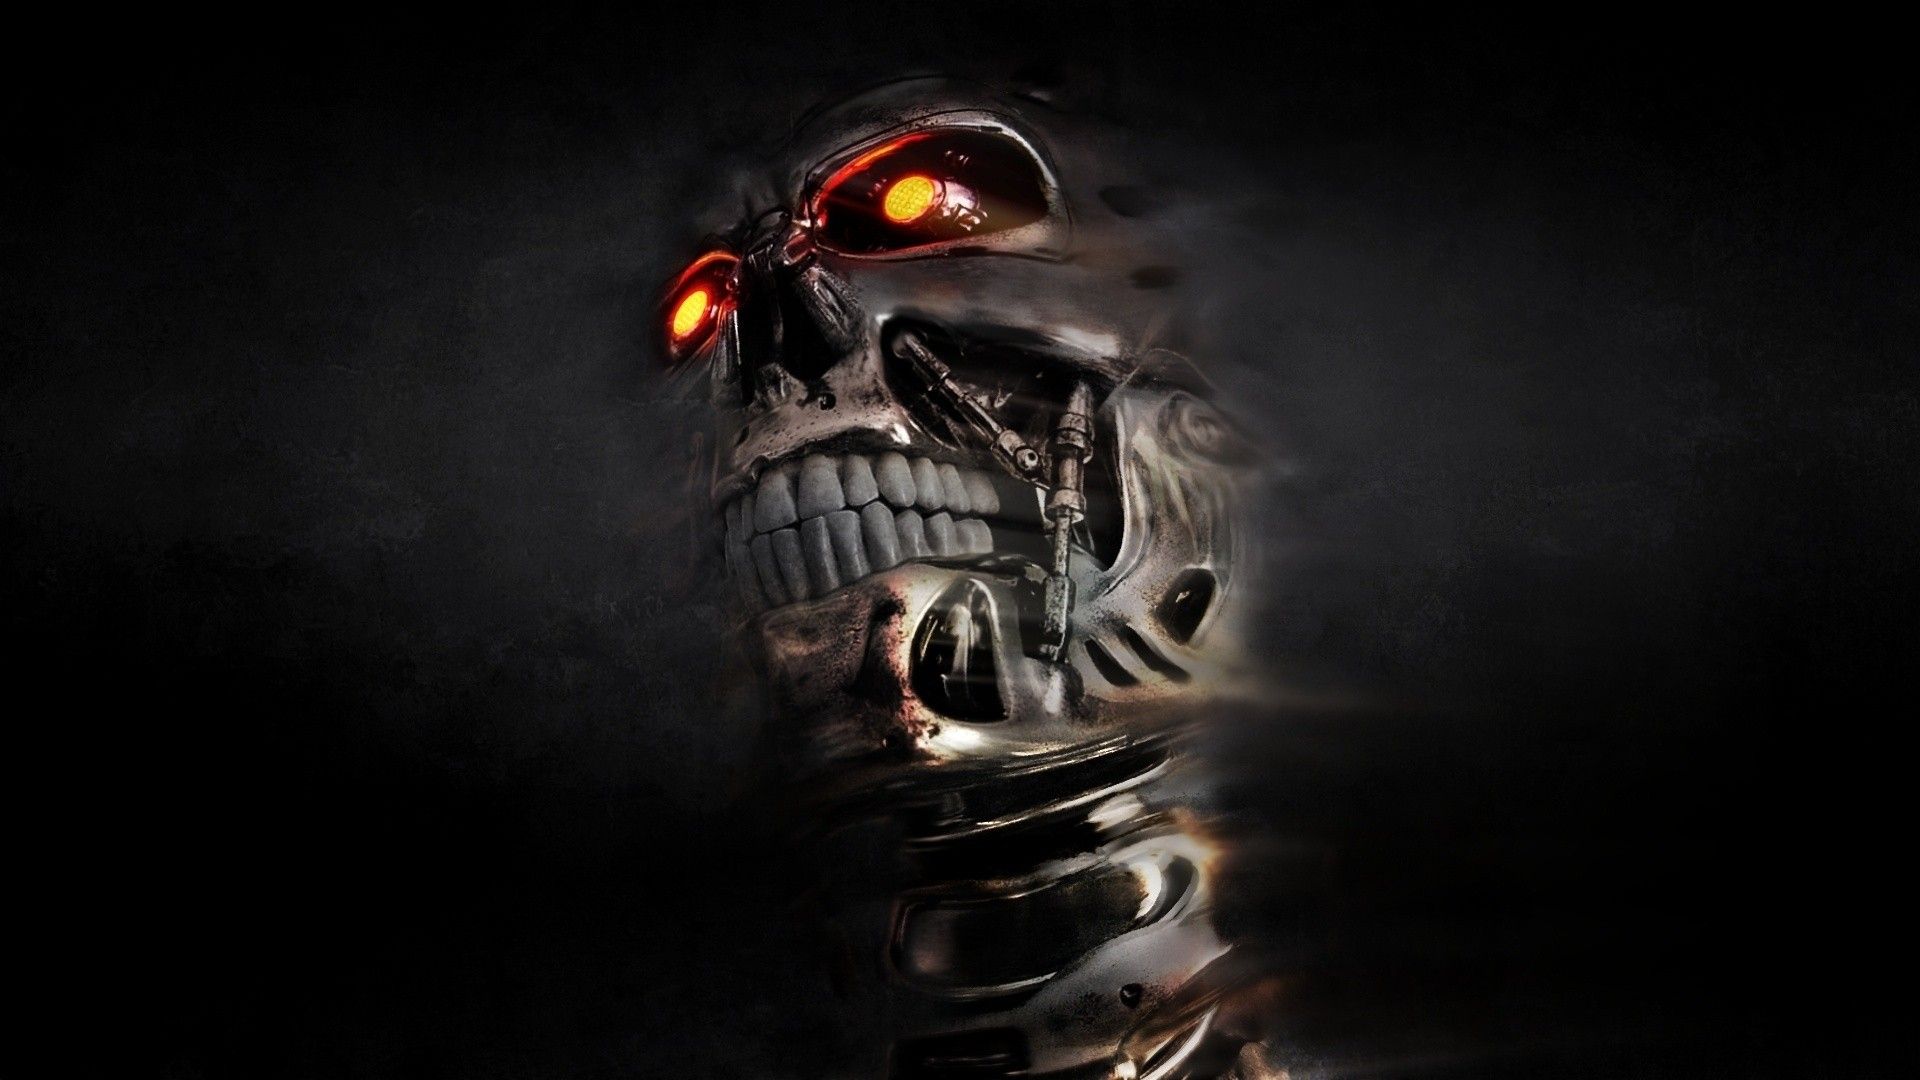 Gallery for - terminator wallpaper free